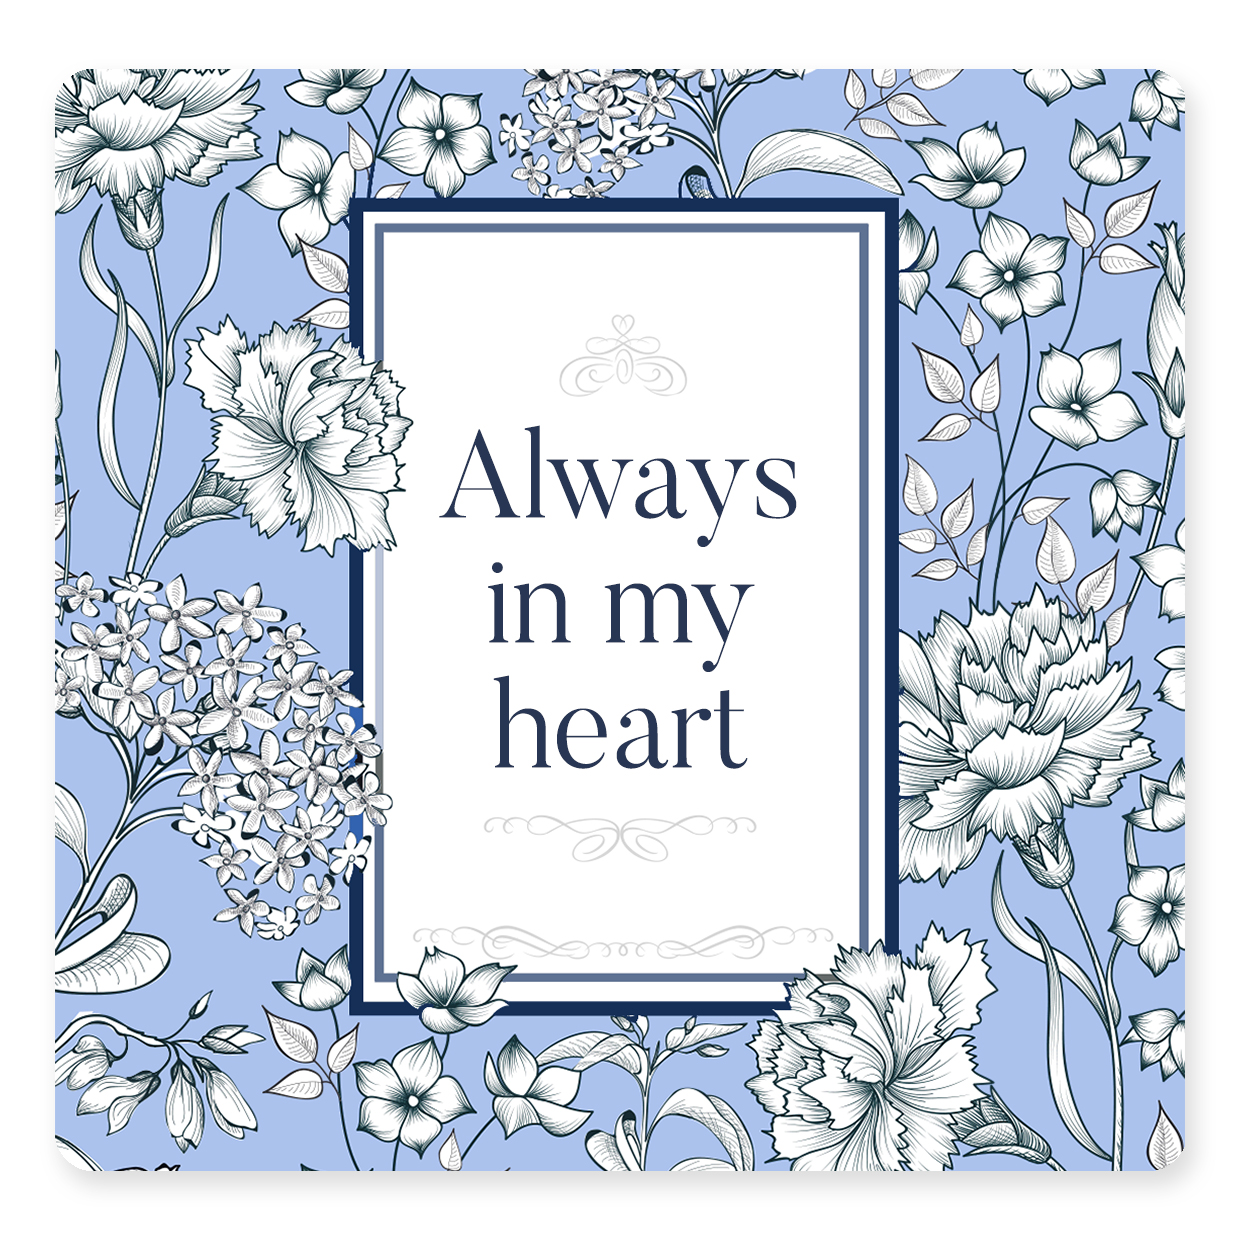 ALWAYS IN MY HEART - sent on May 30th, 2021